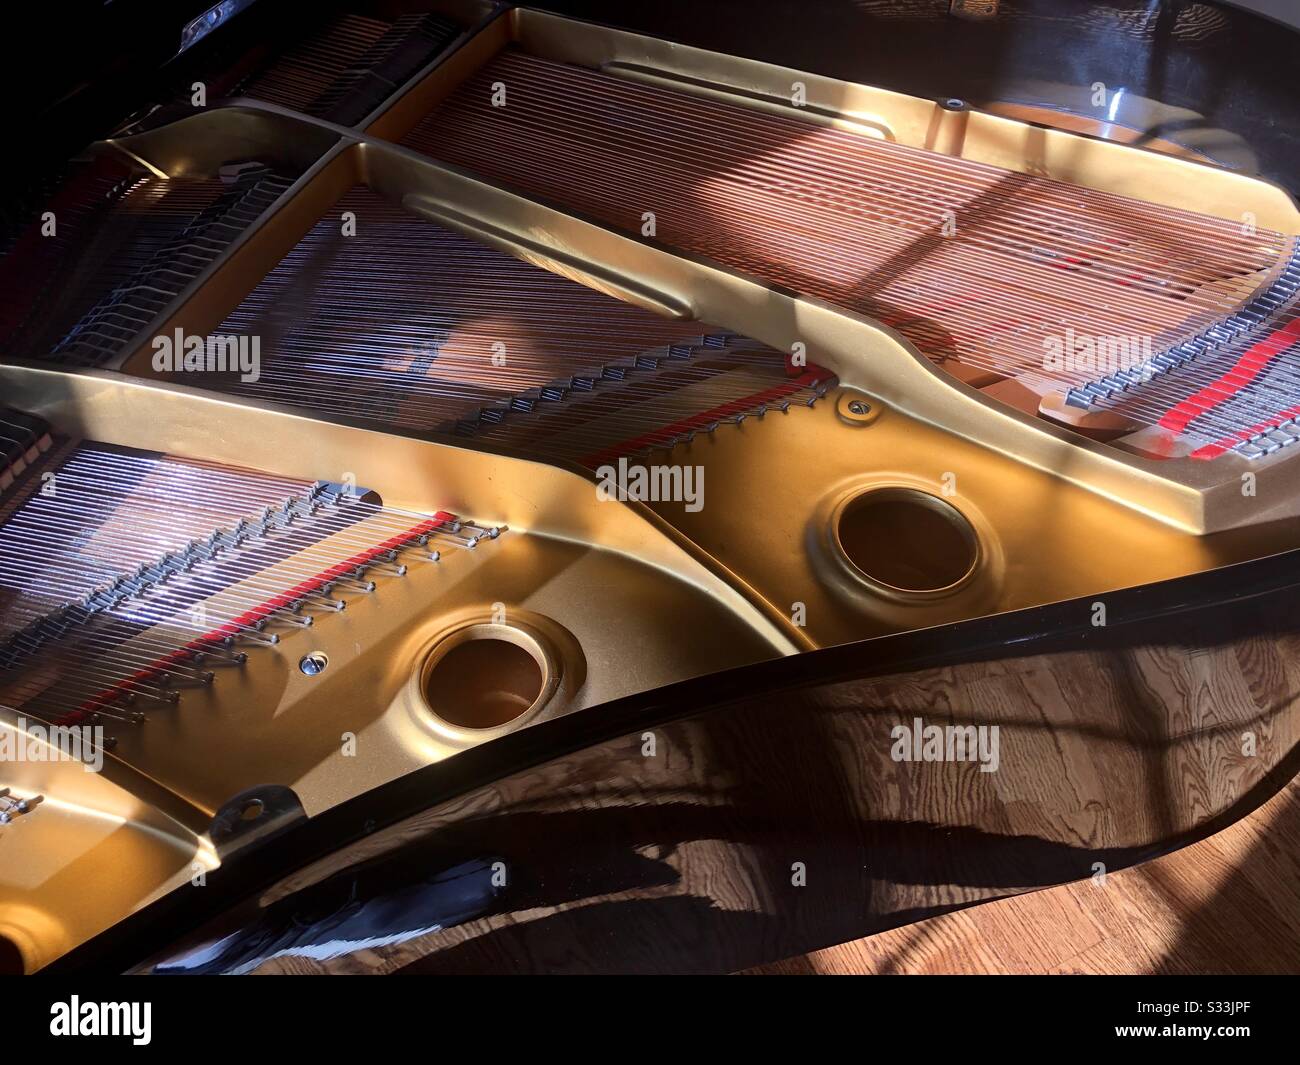 View from above of the inside of a baby grand piano, including soundboard, brass, strings, and pegs Stock Photo